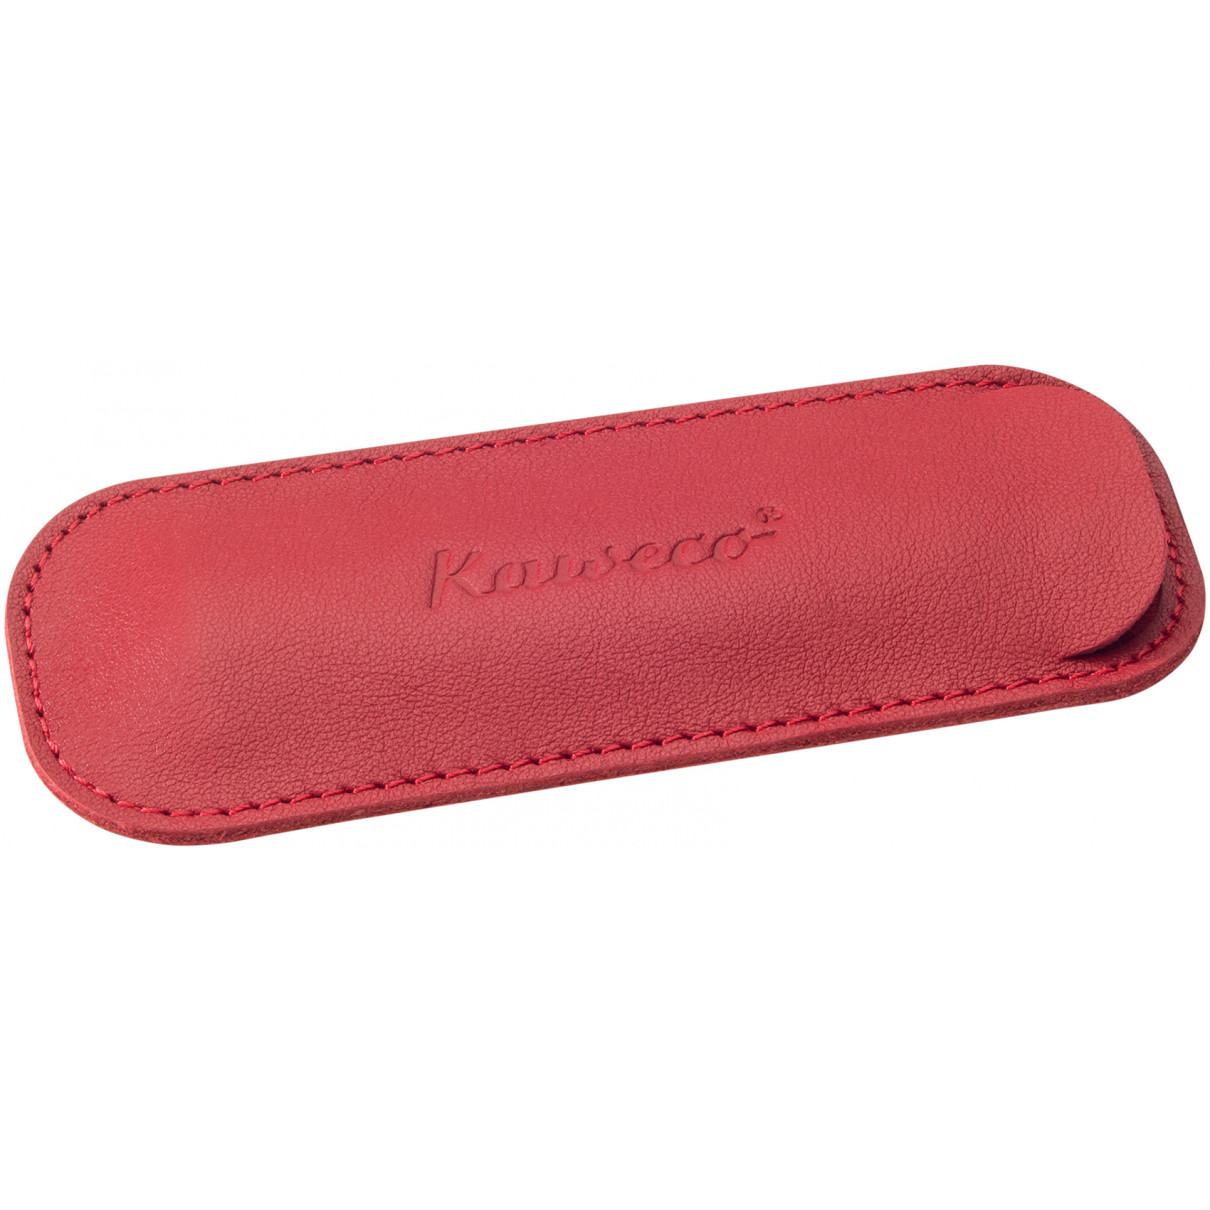 Kaweco Eco Leather Pouch for Sport Pens - Chilli Pepper - Double